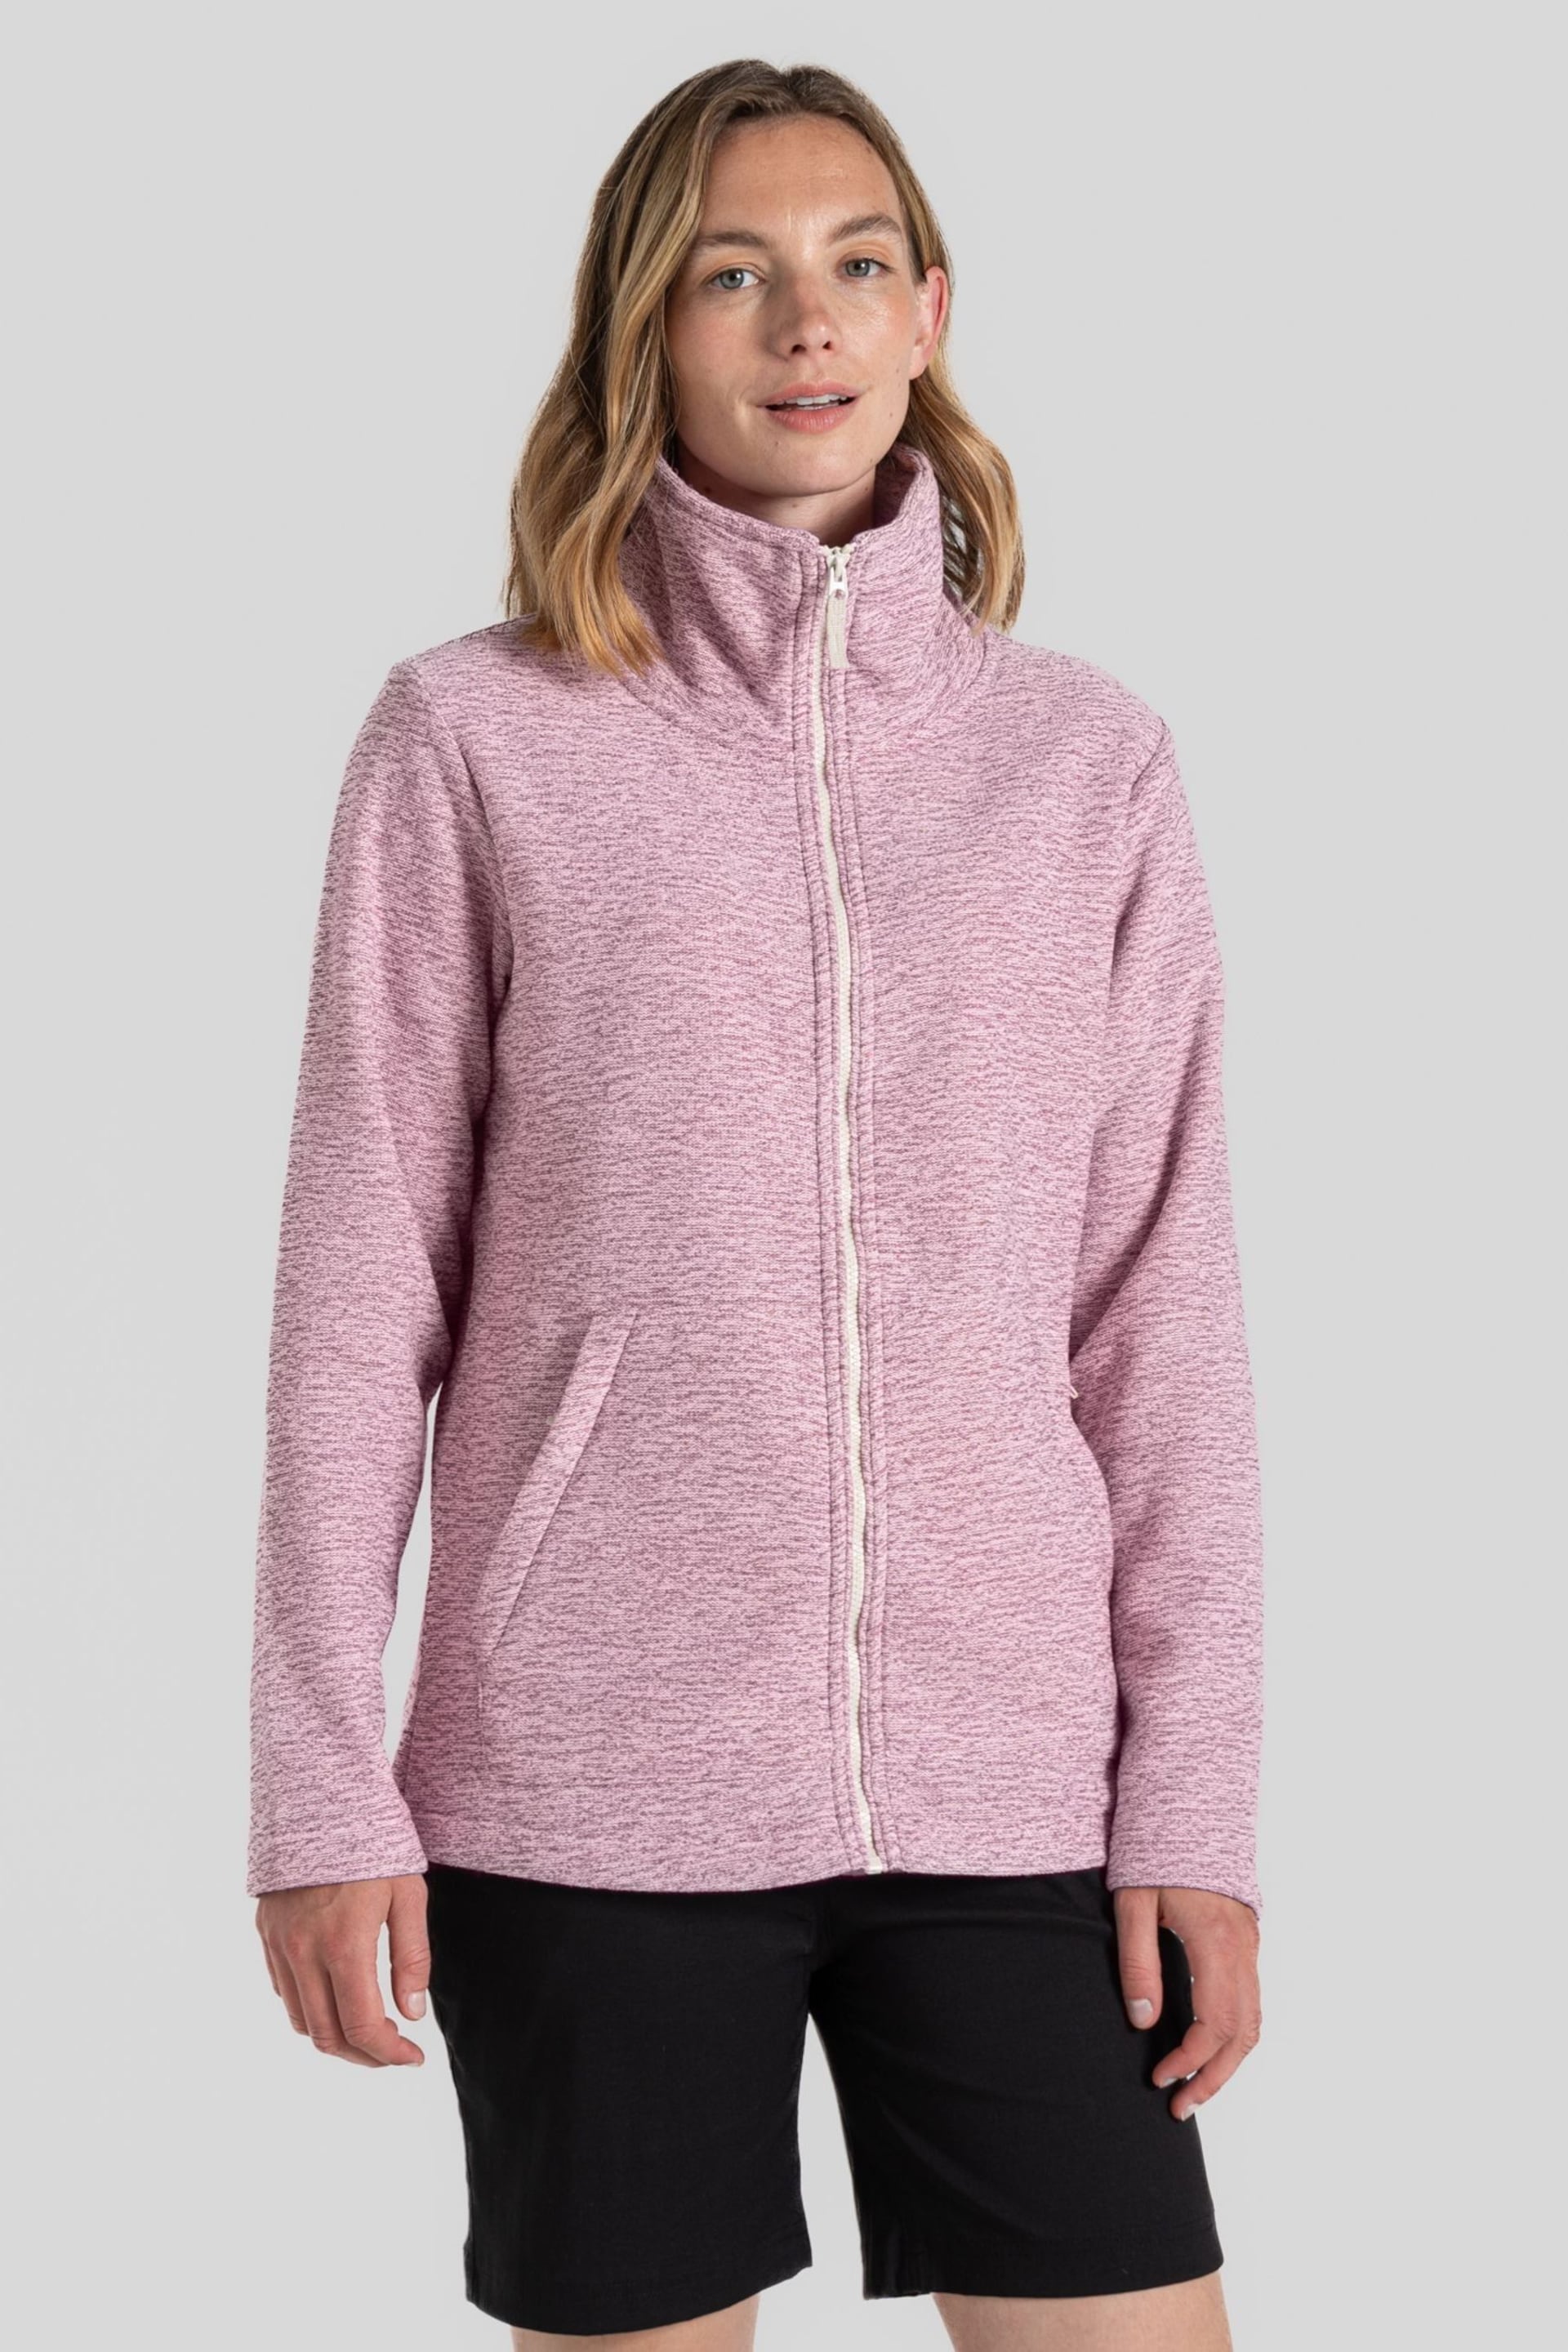 Craghoppers Pink Aio Jacket - Image 1 of 5